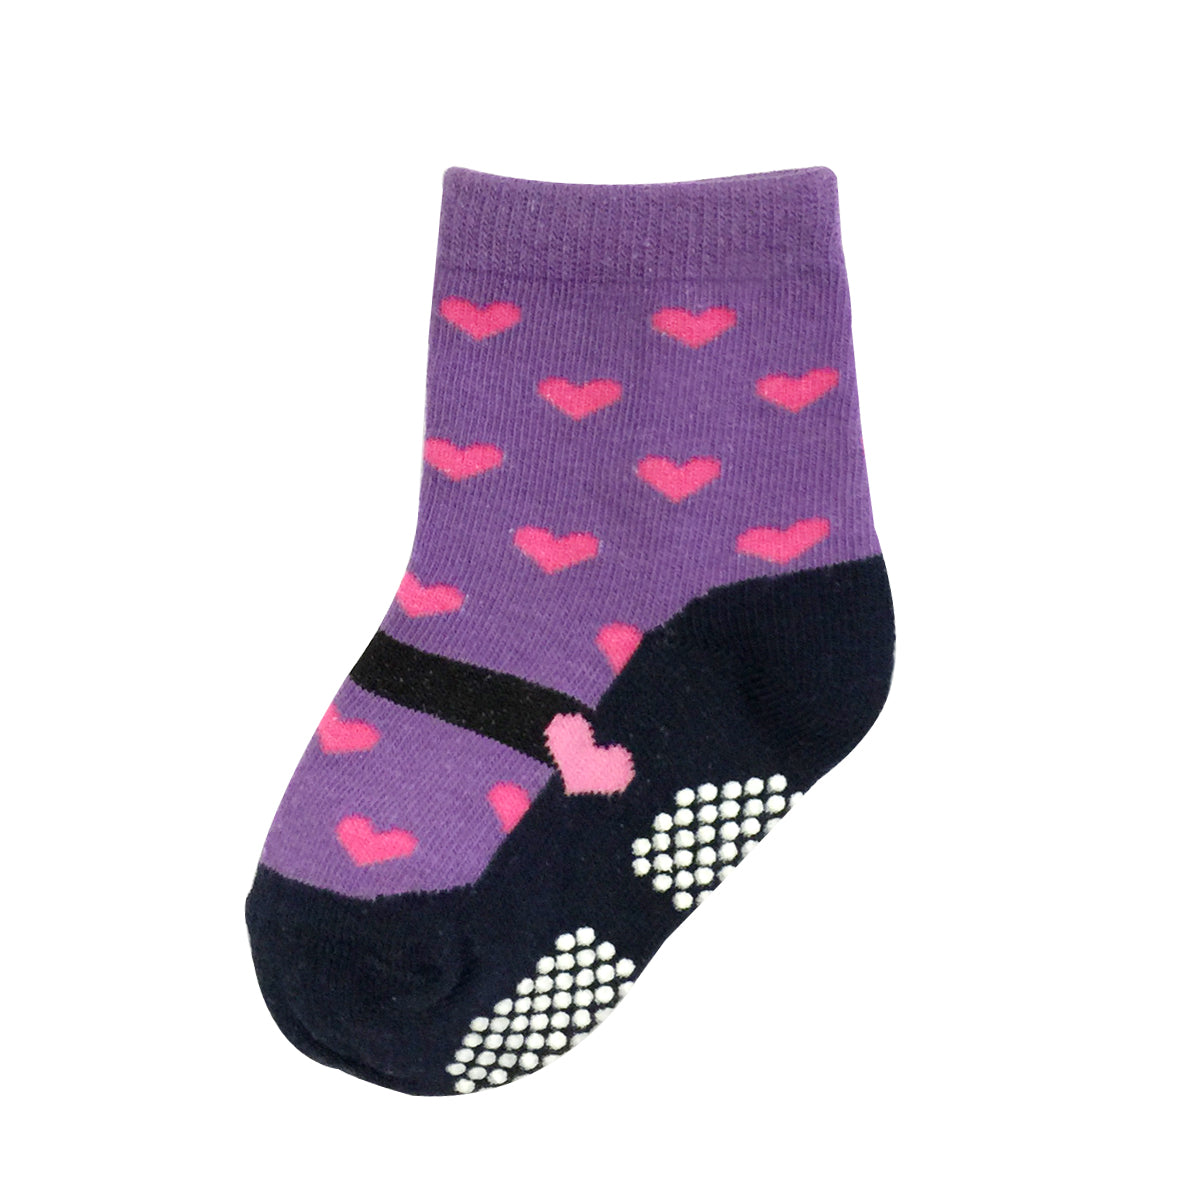 Wrapables Playful Sneakers and Sweet Mary Jane Non-Skid Socks (Set of 6), SET1